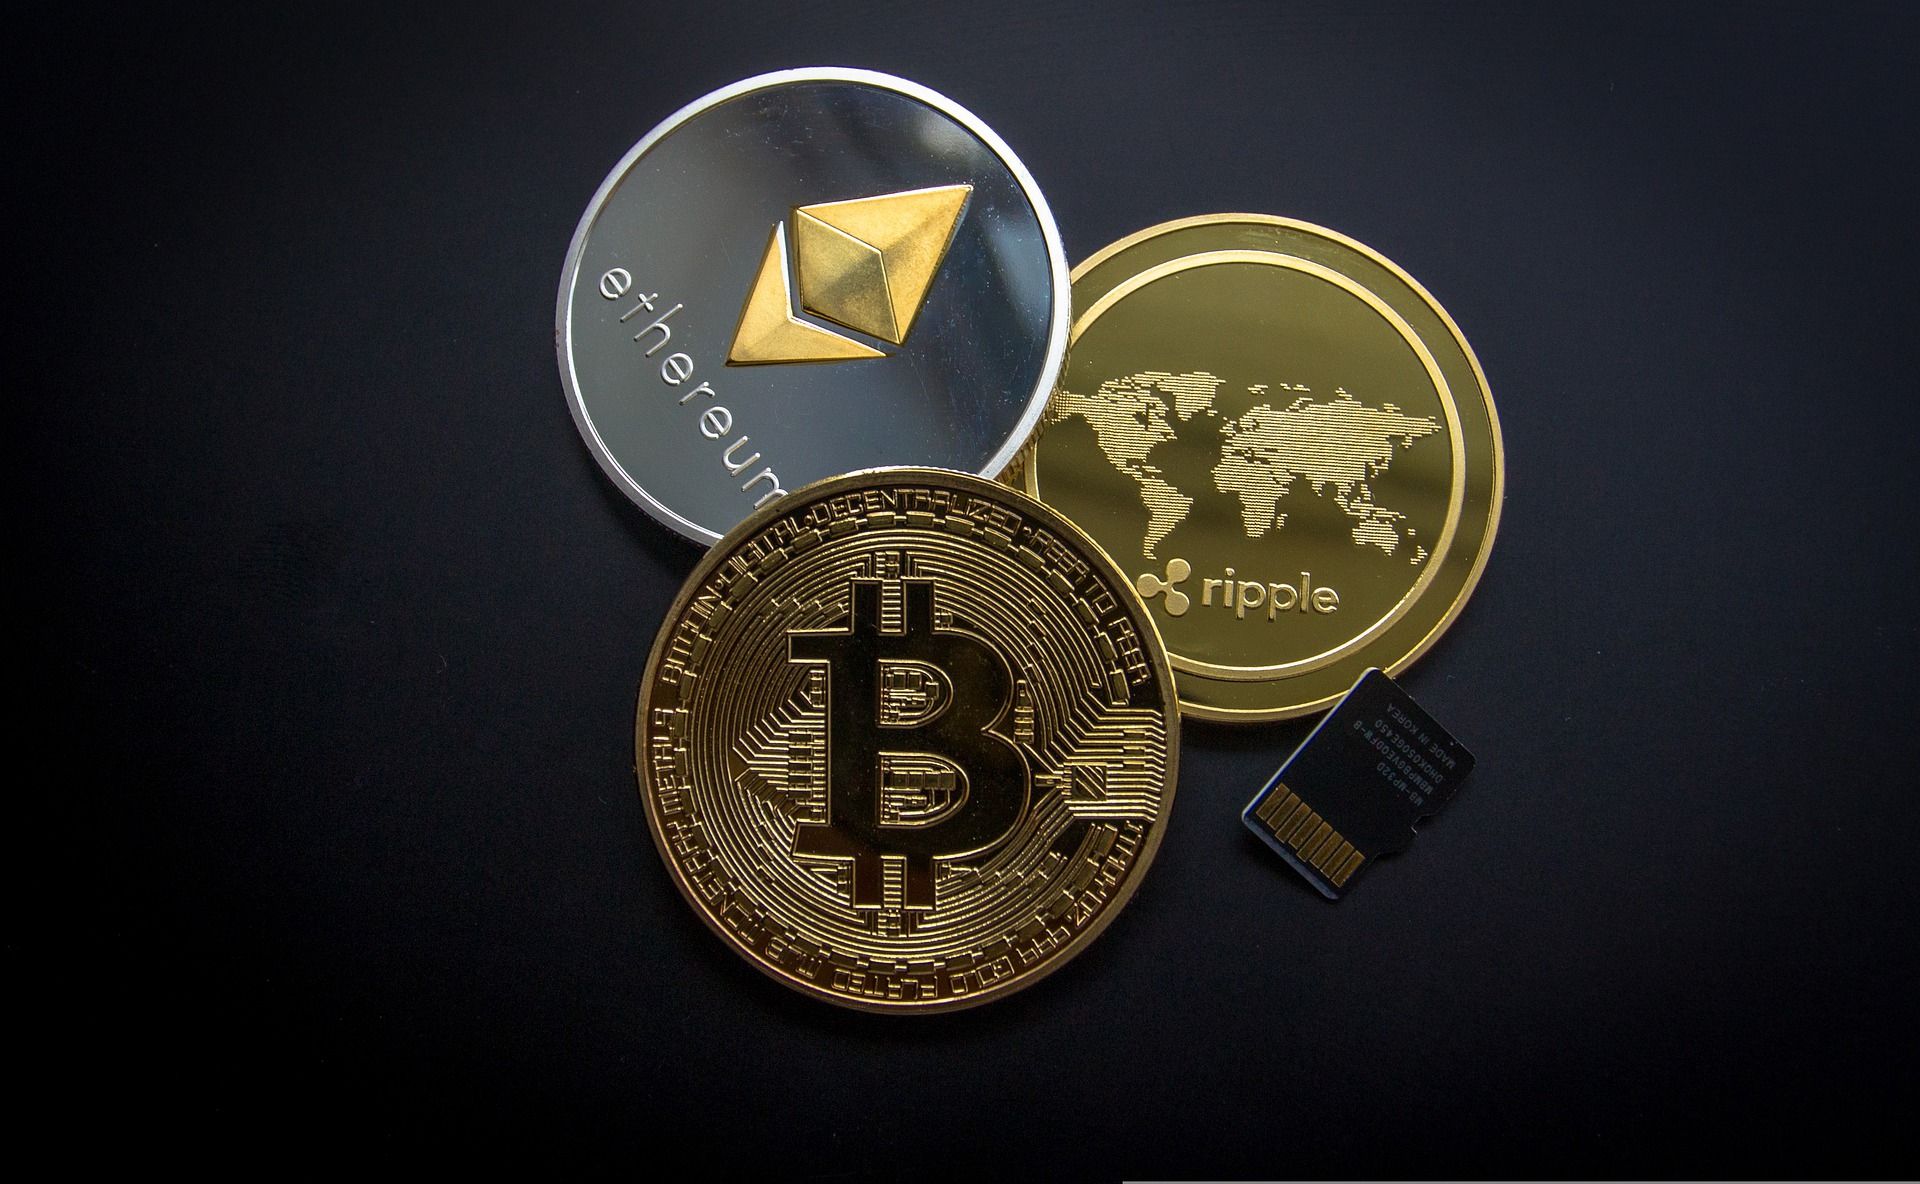 Top 5 cryptocurrencies of the day: Bitcoin down 5%, FTX Token trends at no. 1